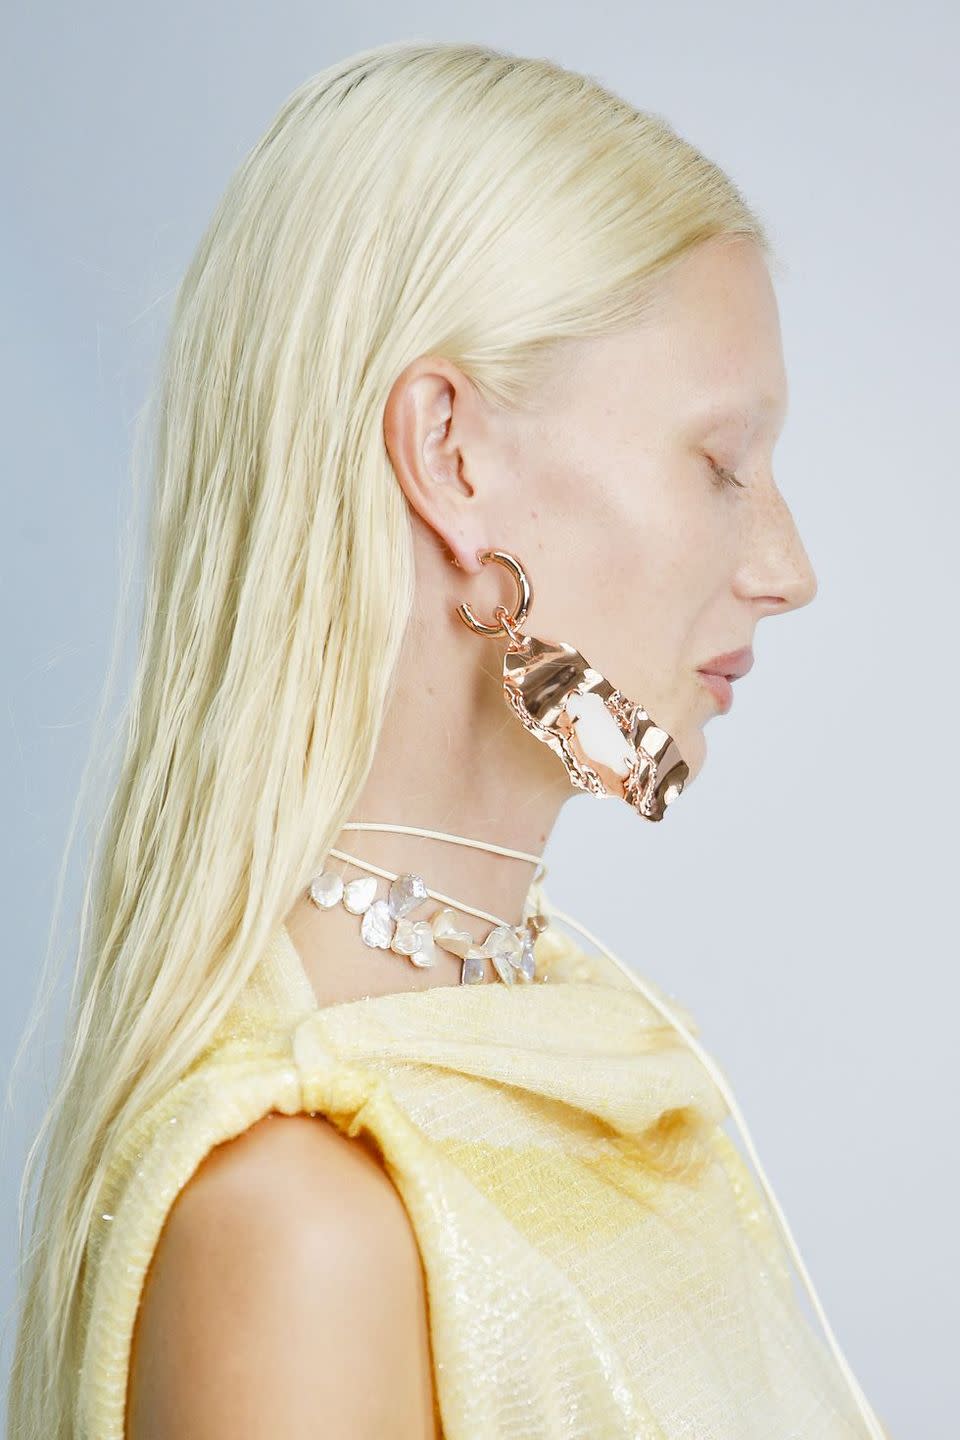 <p>It was all about textures this past year, so look out for this crushed metal vibe when picking out your next jewelry piece.</p><p><em>Acne Studio</em></p>